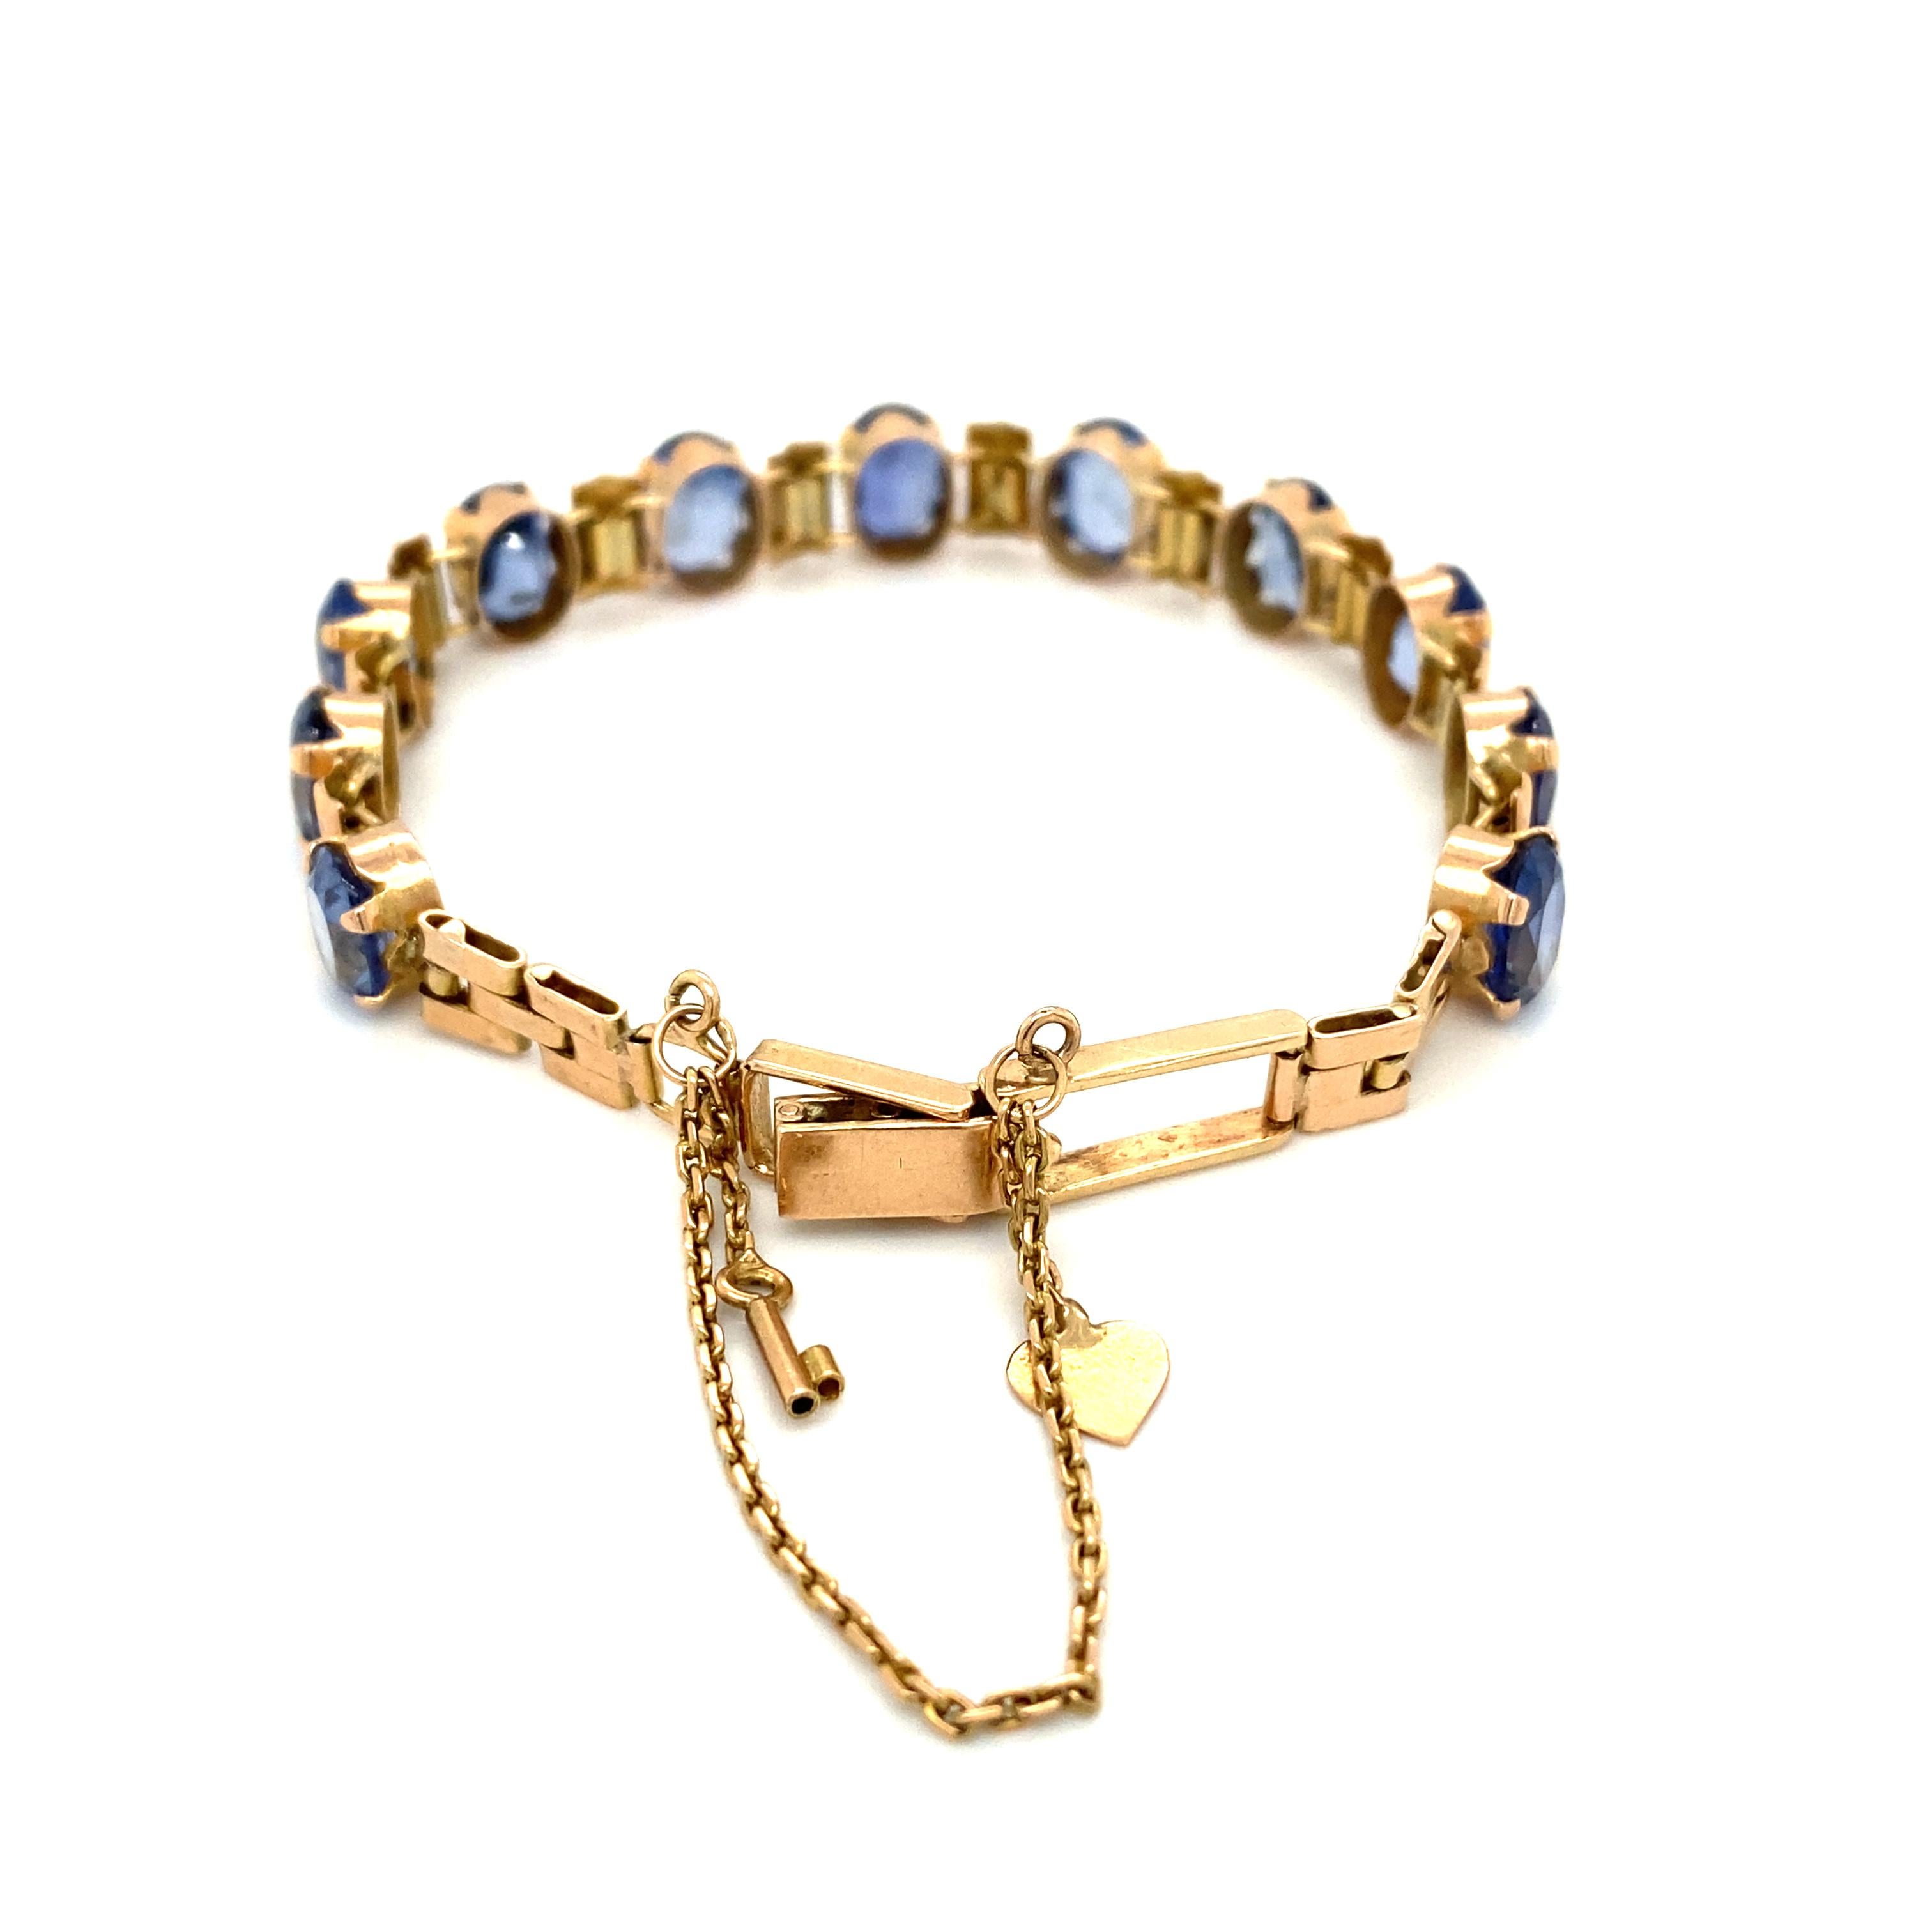 Item Details: This statement bracelet features oval iolite stones with gold spacers. The safety chain has charms with a heart and key. This bracelet is crafted in 14 karat yellow gold.

Circa: 1990s
Metal Type: 14 Karat Gold
Weight: 14.3 grams
Size: